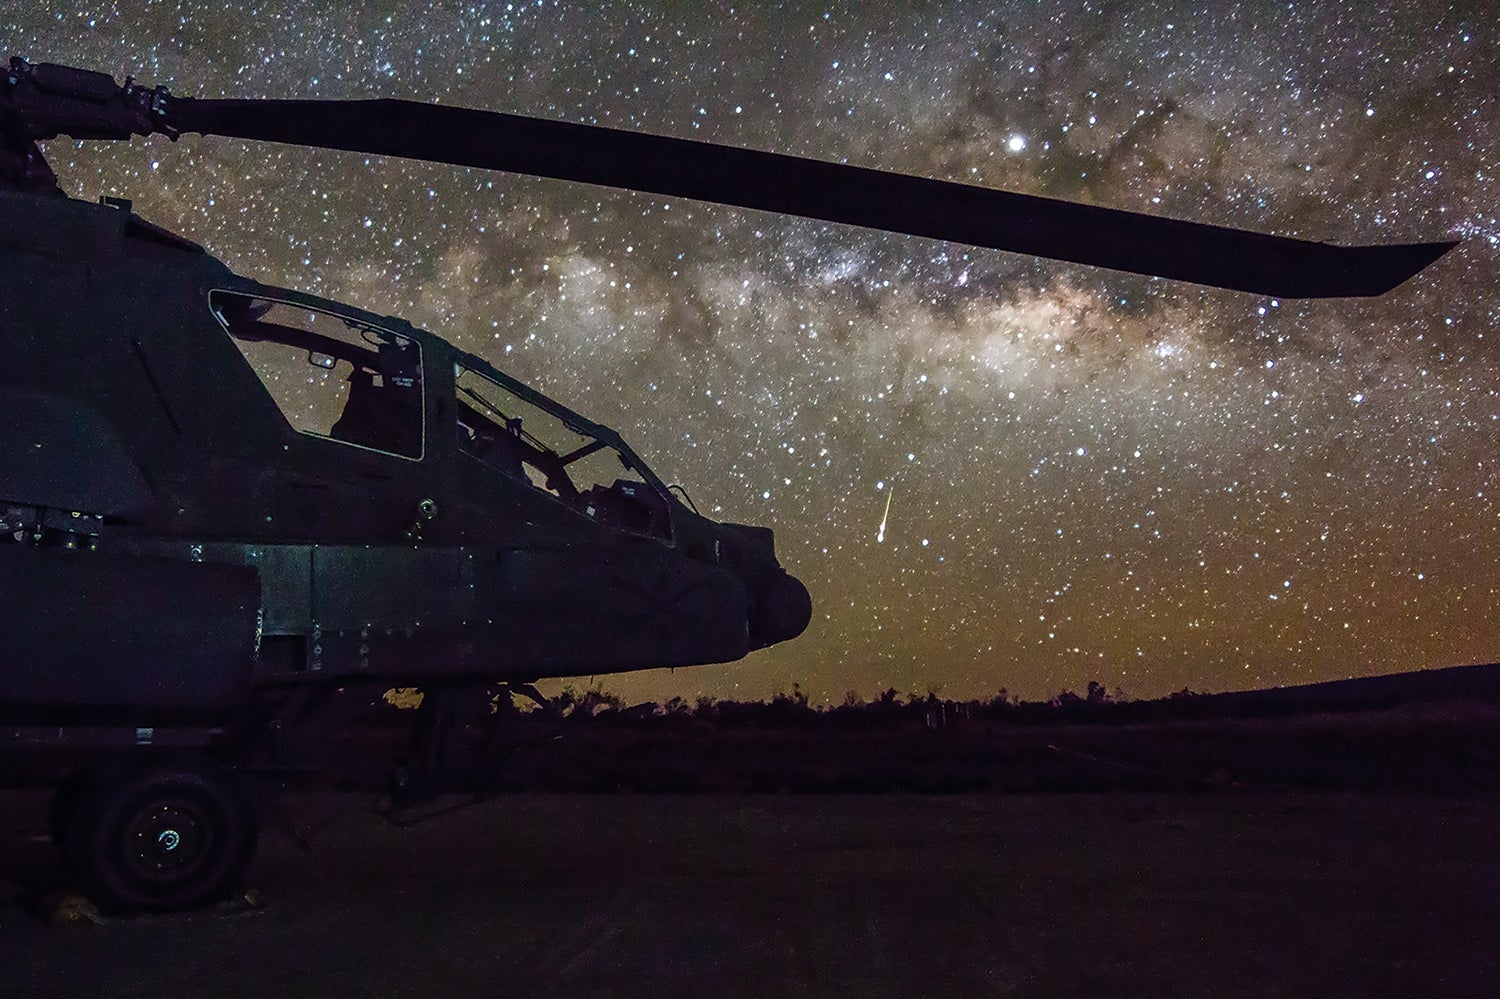 A shooting star serves as the backdrop for an AH-64 Apache attack helicopter on the flight line at Pohakuloa Training Area, Hawaii. (Credit: U.S. Army/Capt. Keith Kraker)